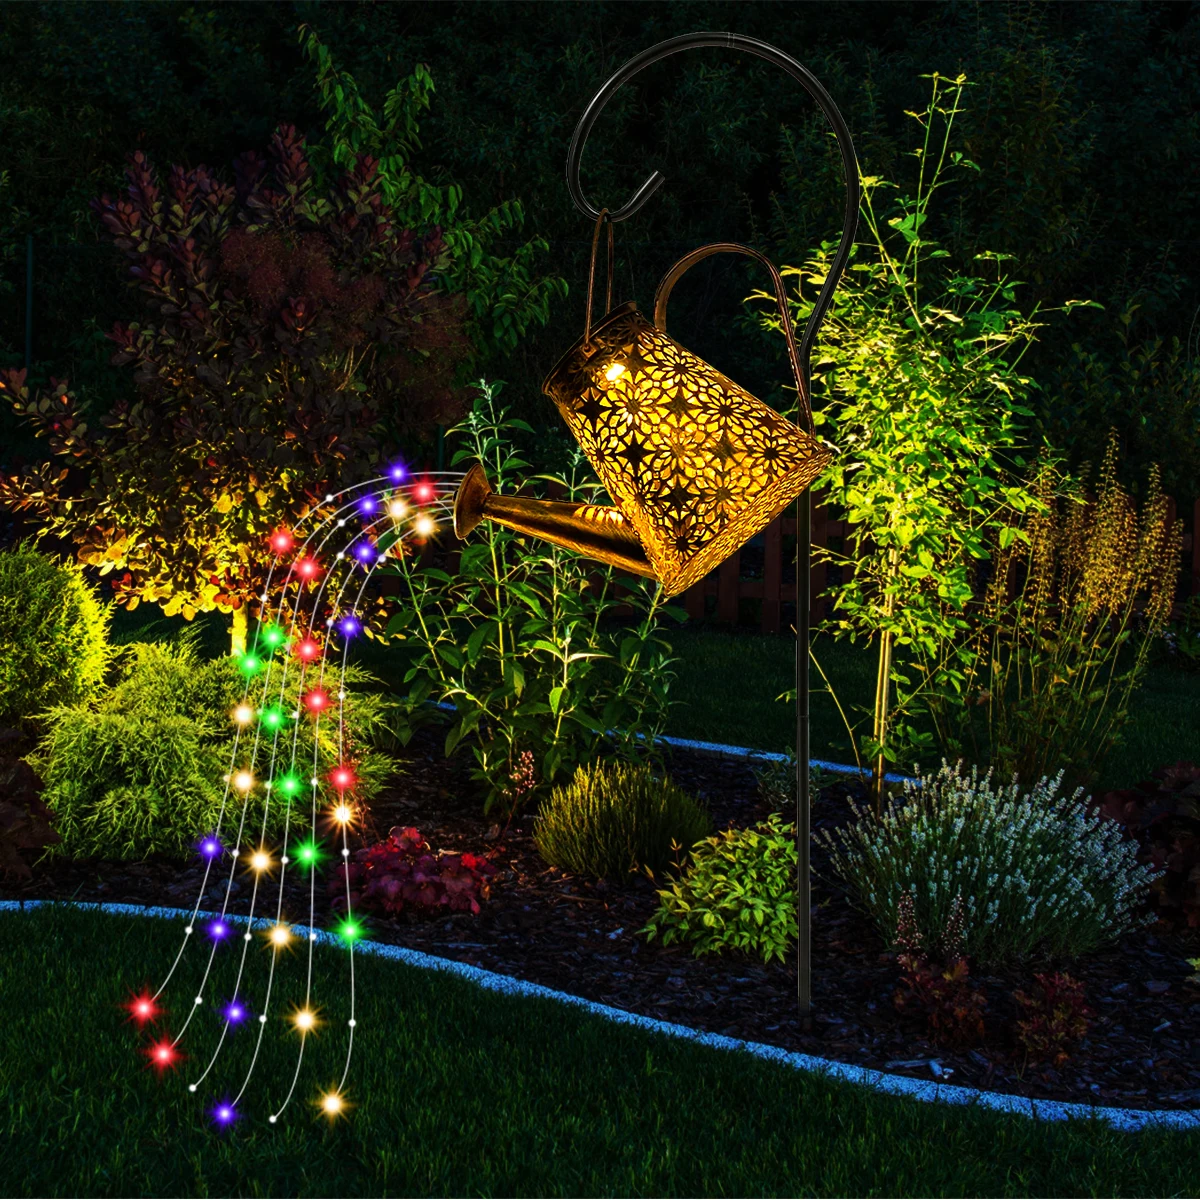 

Solar Watering Can Lights Outdoor Decorative Hanging Solar Lantern with 5 Colorful Light Strings Waterproof 60 LED Retro Metal